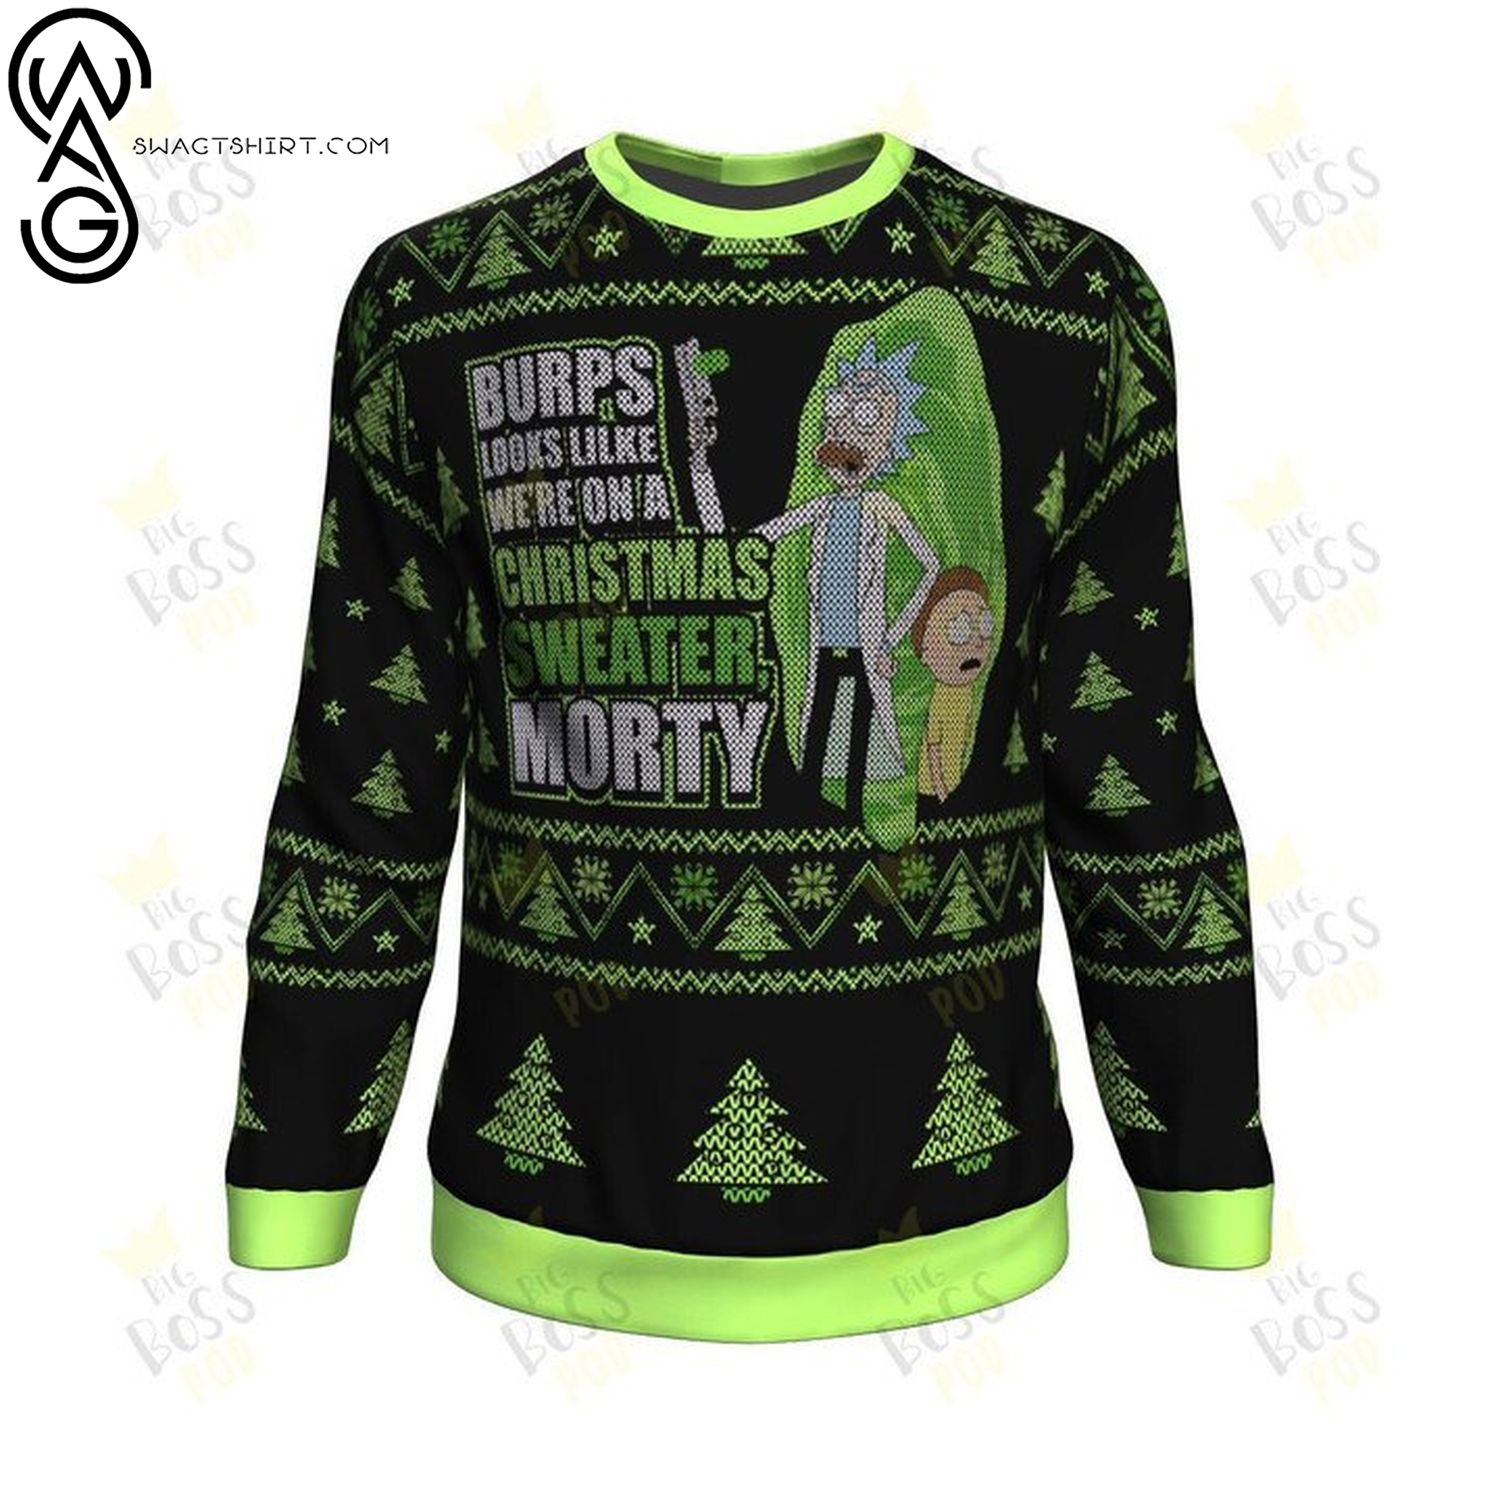 Rick and morty burps look like we're on a christmas sweater ugly christmas sweater - Copy (2)